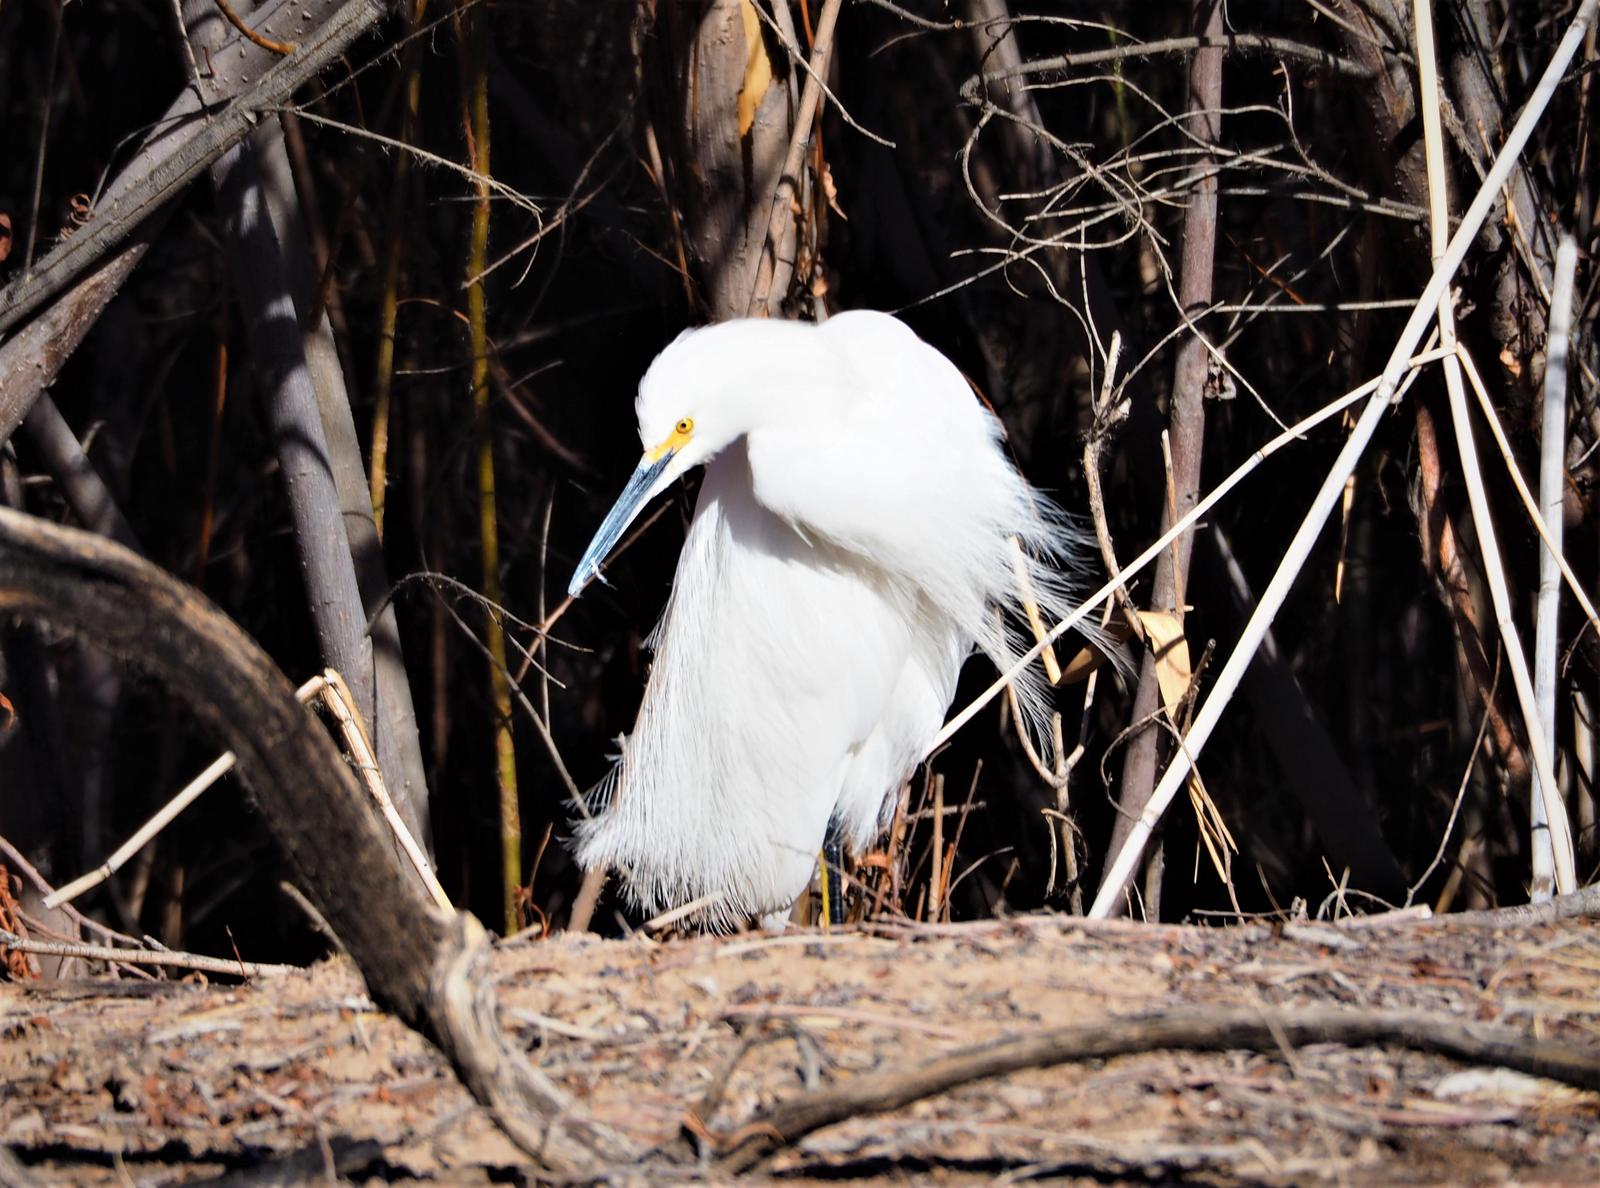 Snowy Egret Photo by Colin Hill